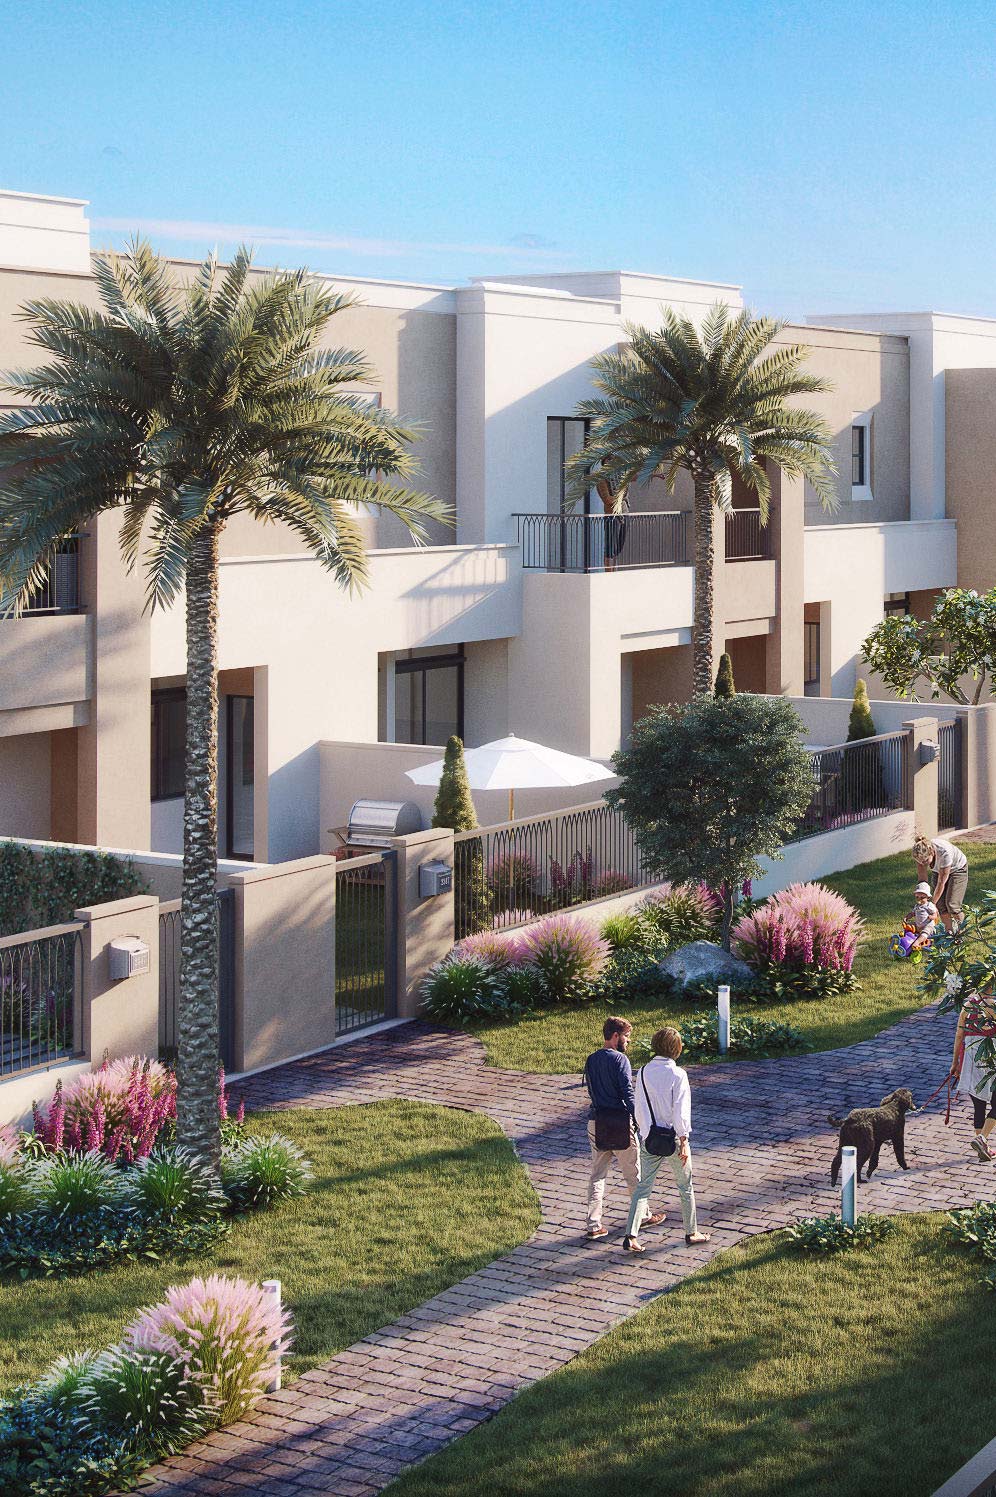 NSHAMA Reem Townhouses for Sale in Town Square Dubai – opr.ae